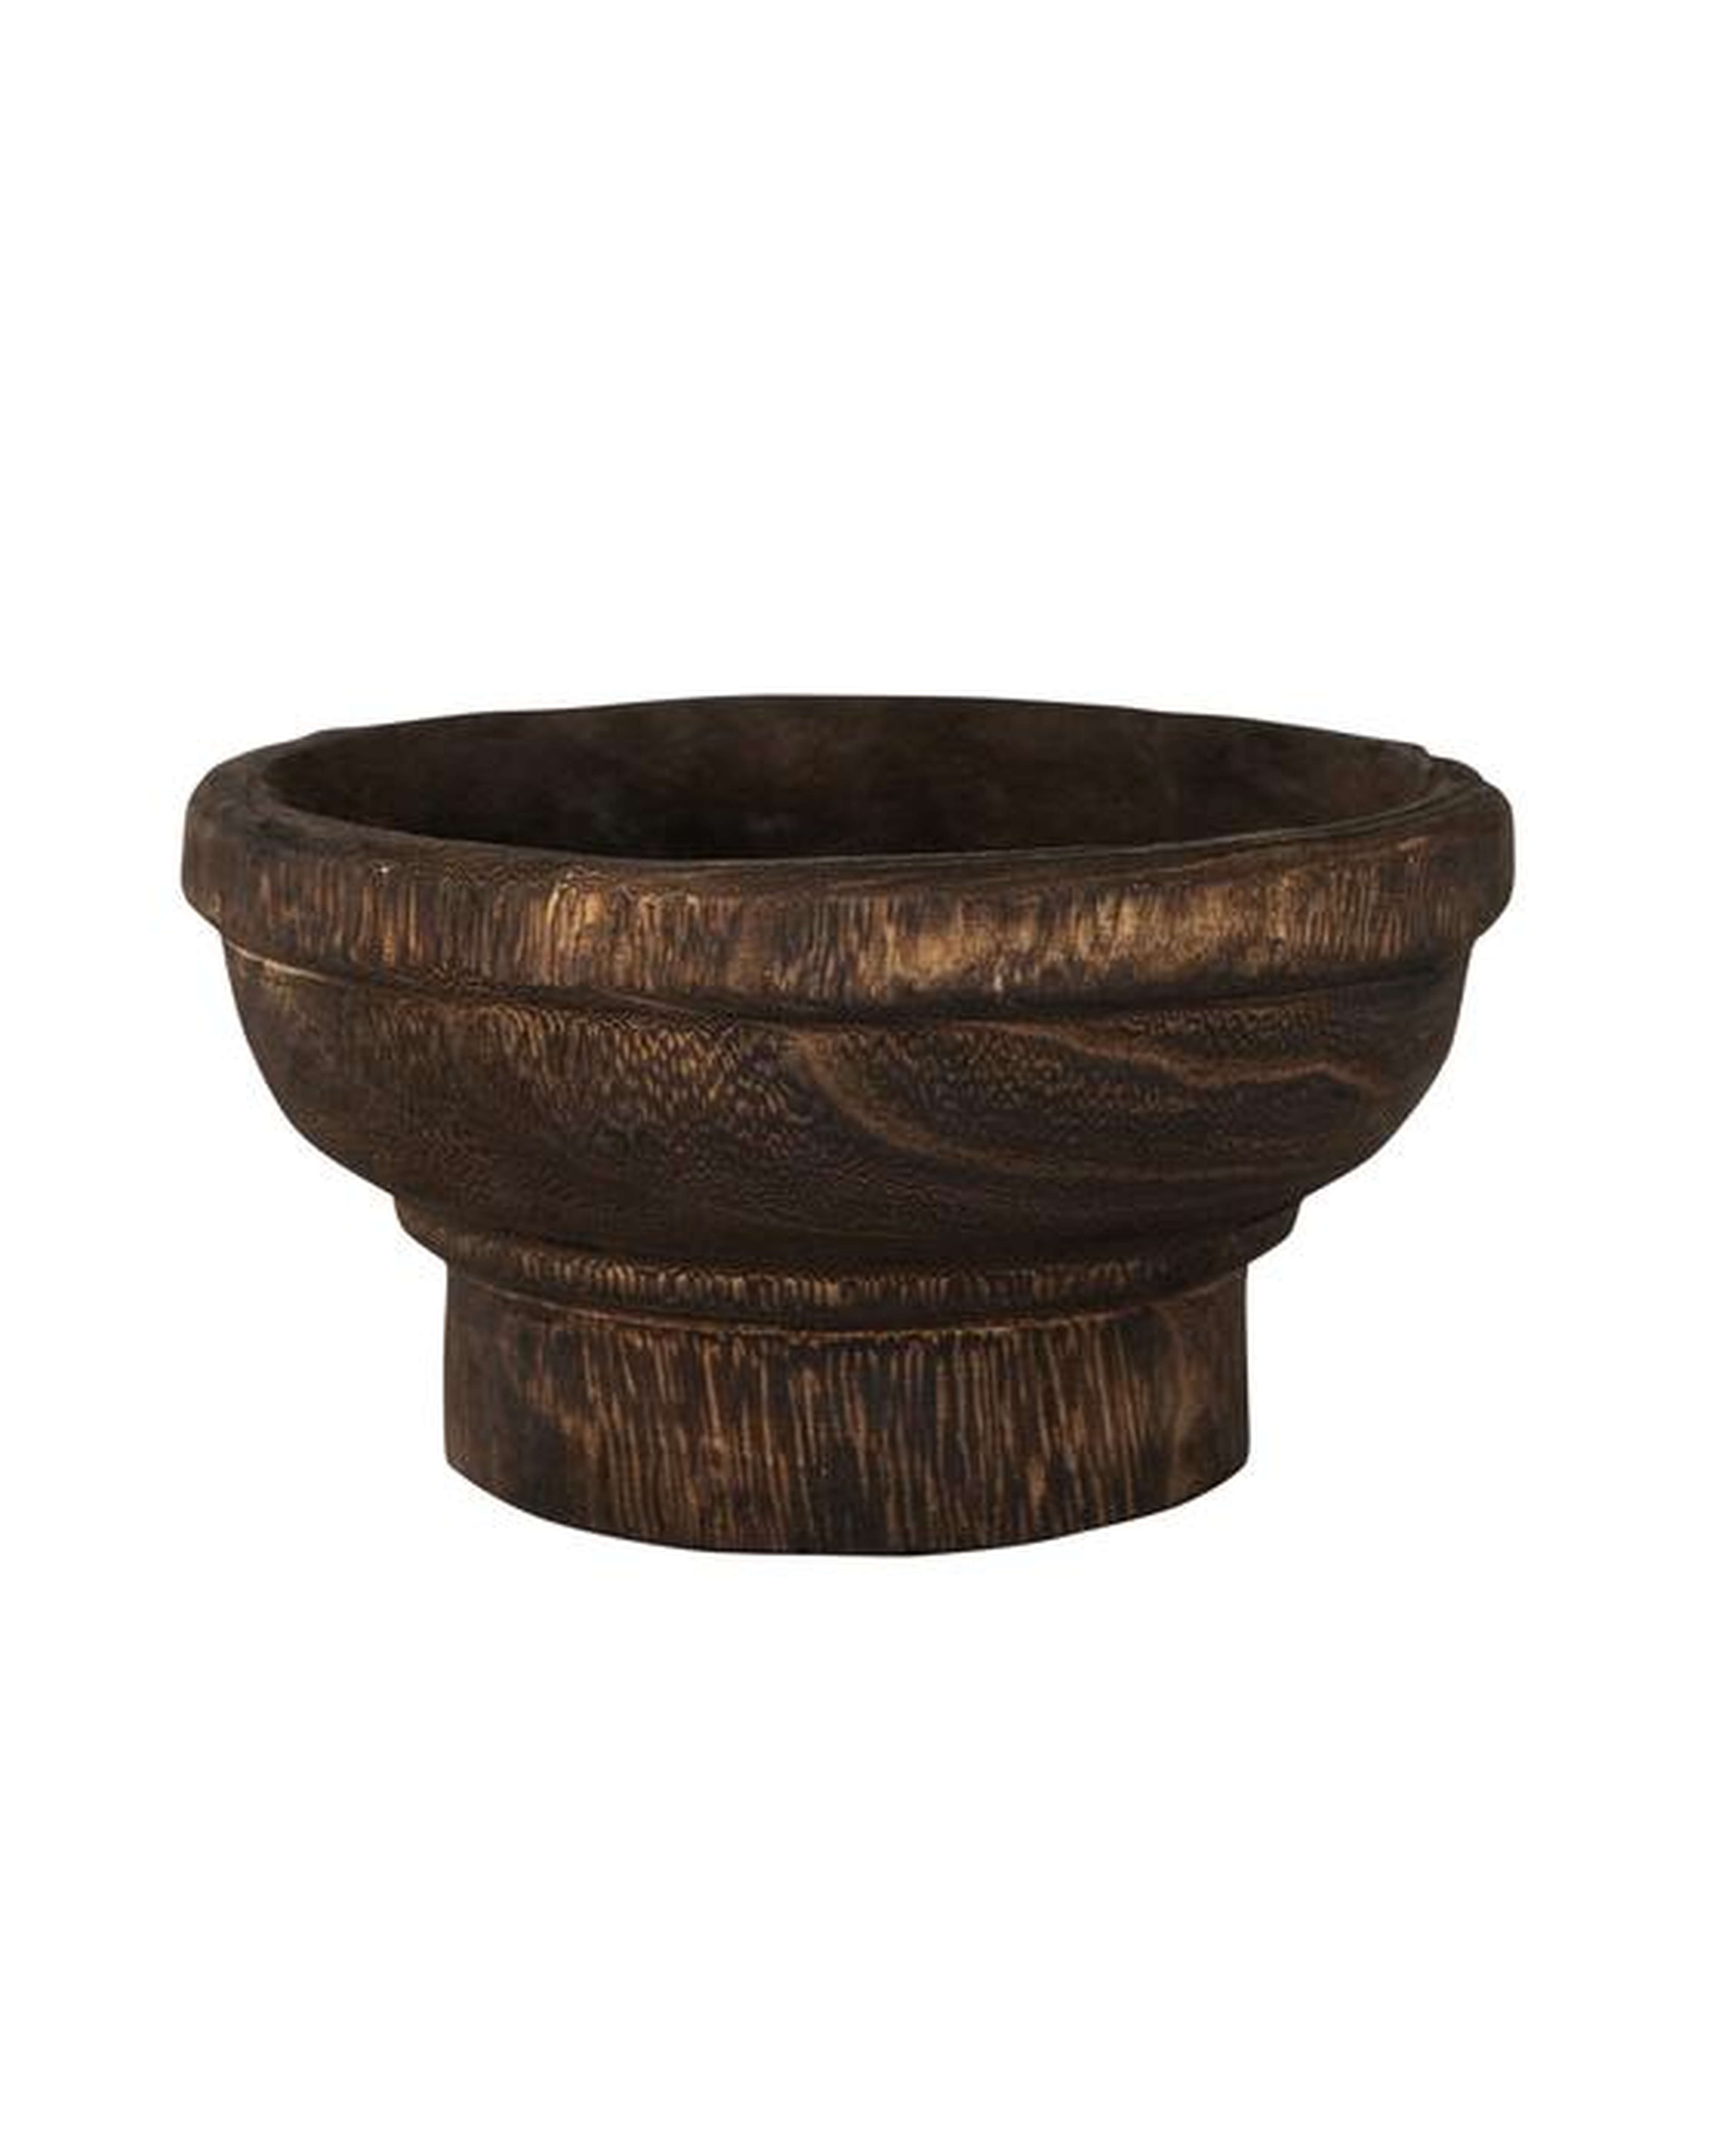 Sivan Footed Bowl - McGee & Co.